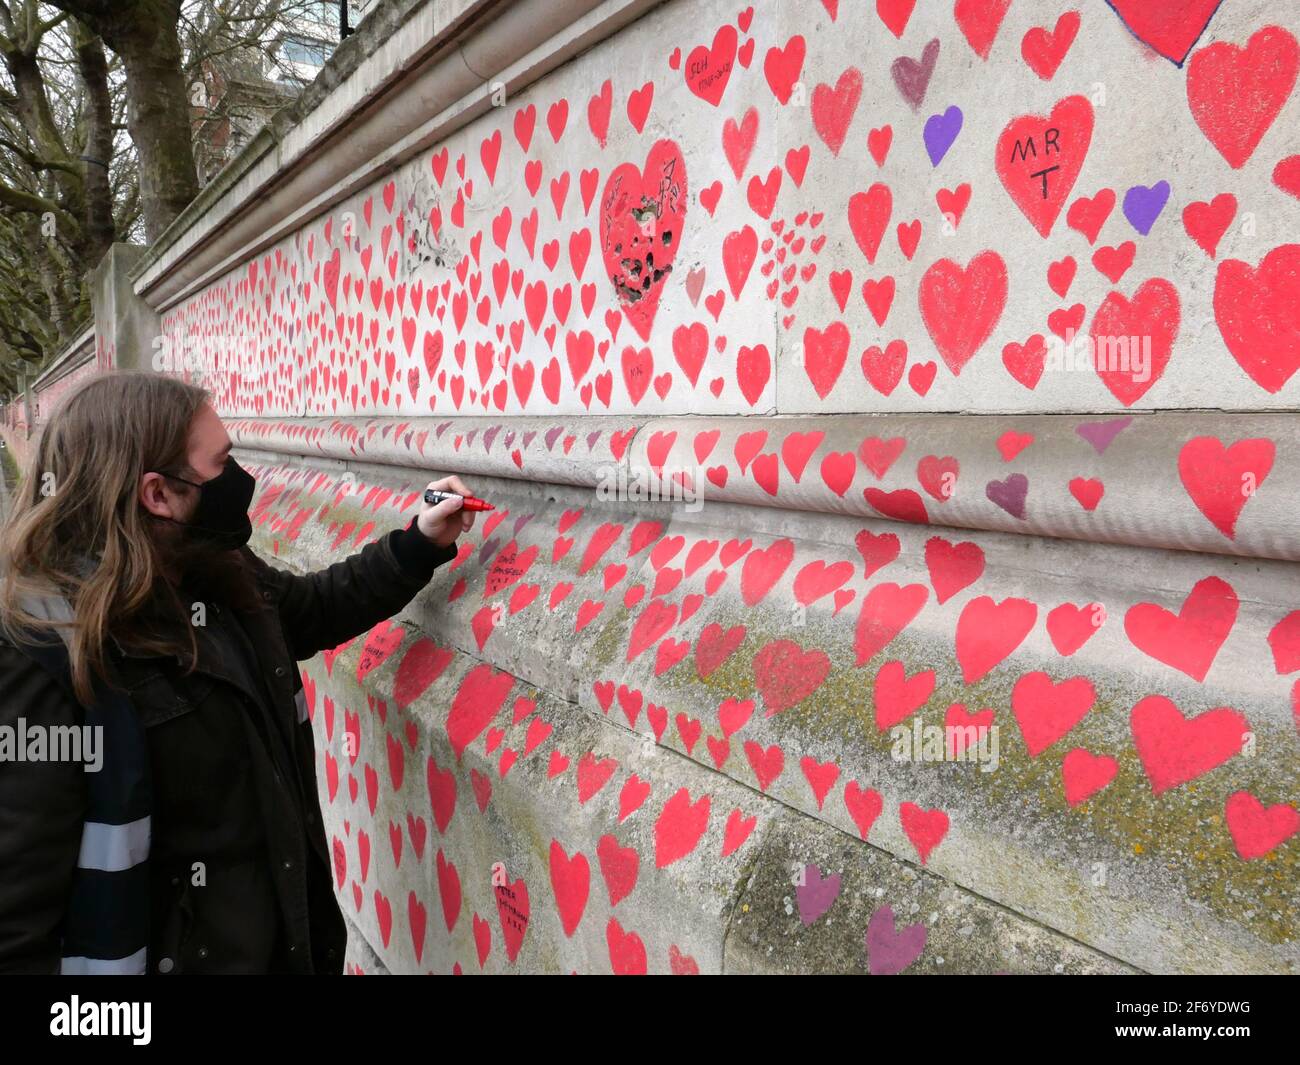 150000 hearts painted in London to represent lives lost to Covid 19 across the UK .Each heart represents someone who was loved and was lost too soon to Covid - 19 . Matt Fowler , co Founder said when they started painting the hearts .Labour leader Keir Starmer arrived and showed support . Hopefully the council will seal the hearts once they are finished so it can become a permanent memorial for those who lost there lives and hopefully  a public enquiry can take place to investigate the failings of the Tory Government in order to learn lessons quickly  and prevent further loss of life ... Stock Photo